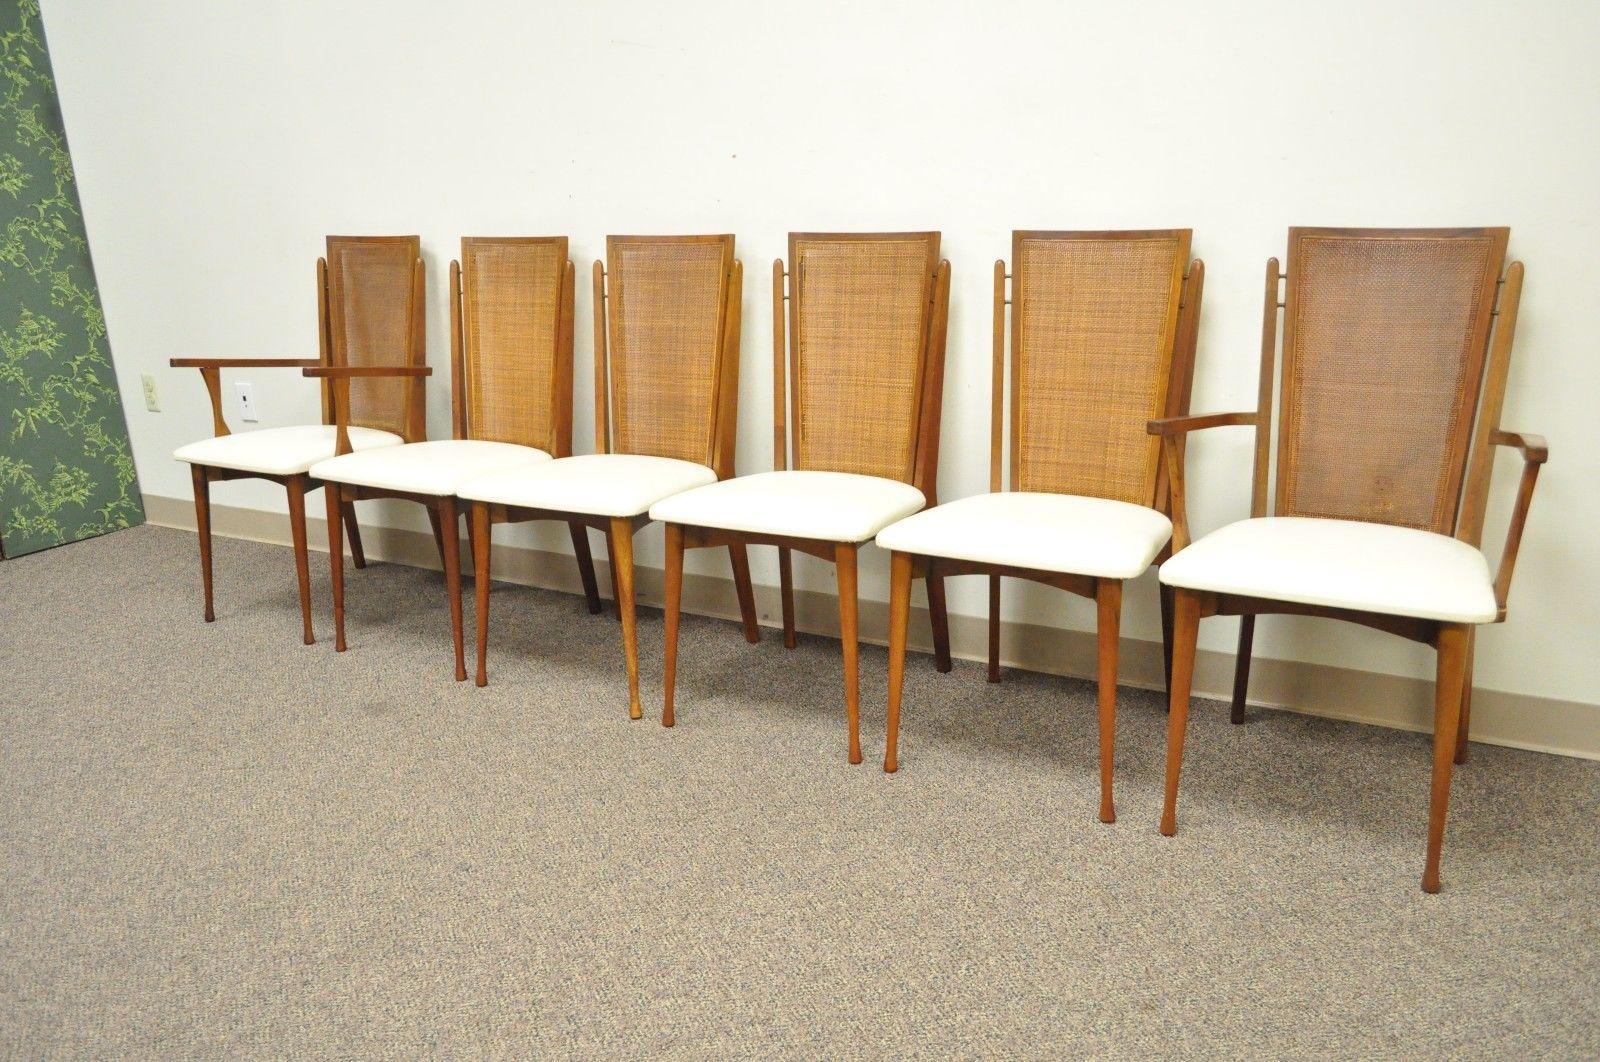 Set of Six Specialty Woodcraft Midcentury Danish Modern Cane Teak Dining Chairs For Sale 6